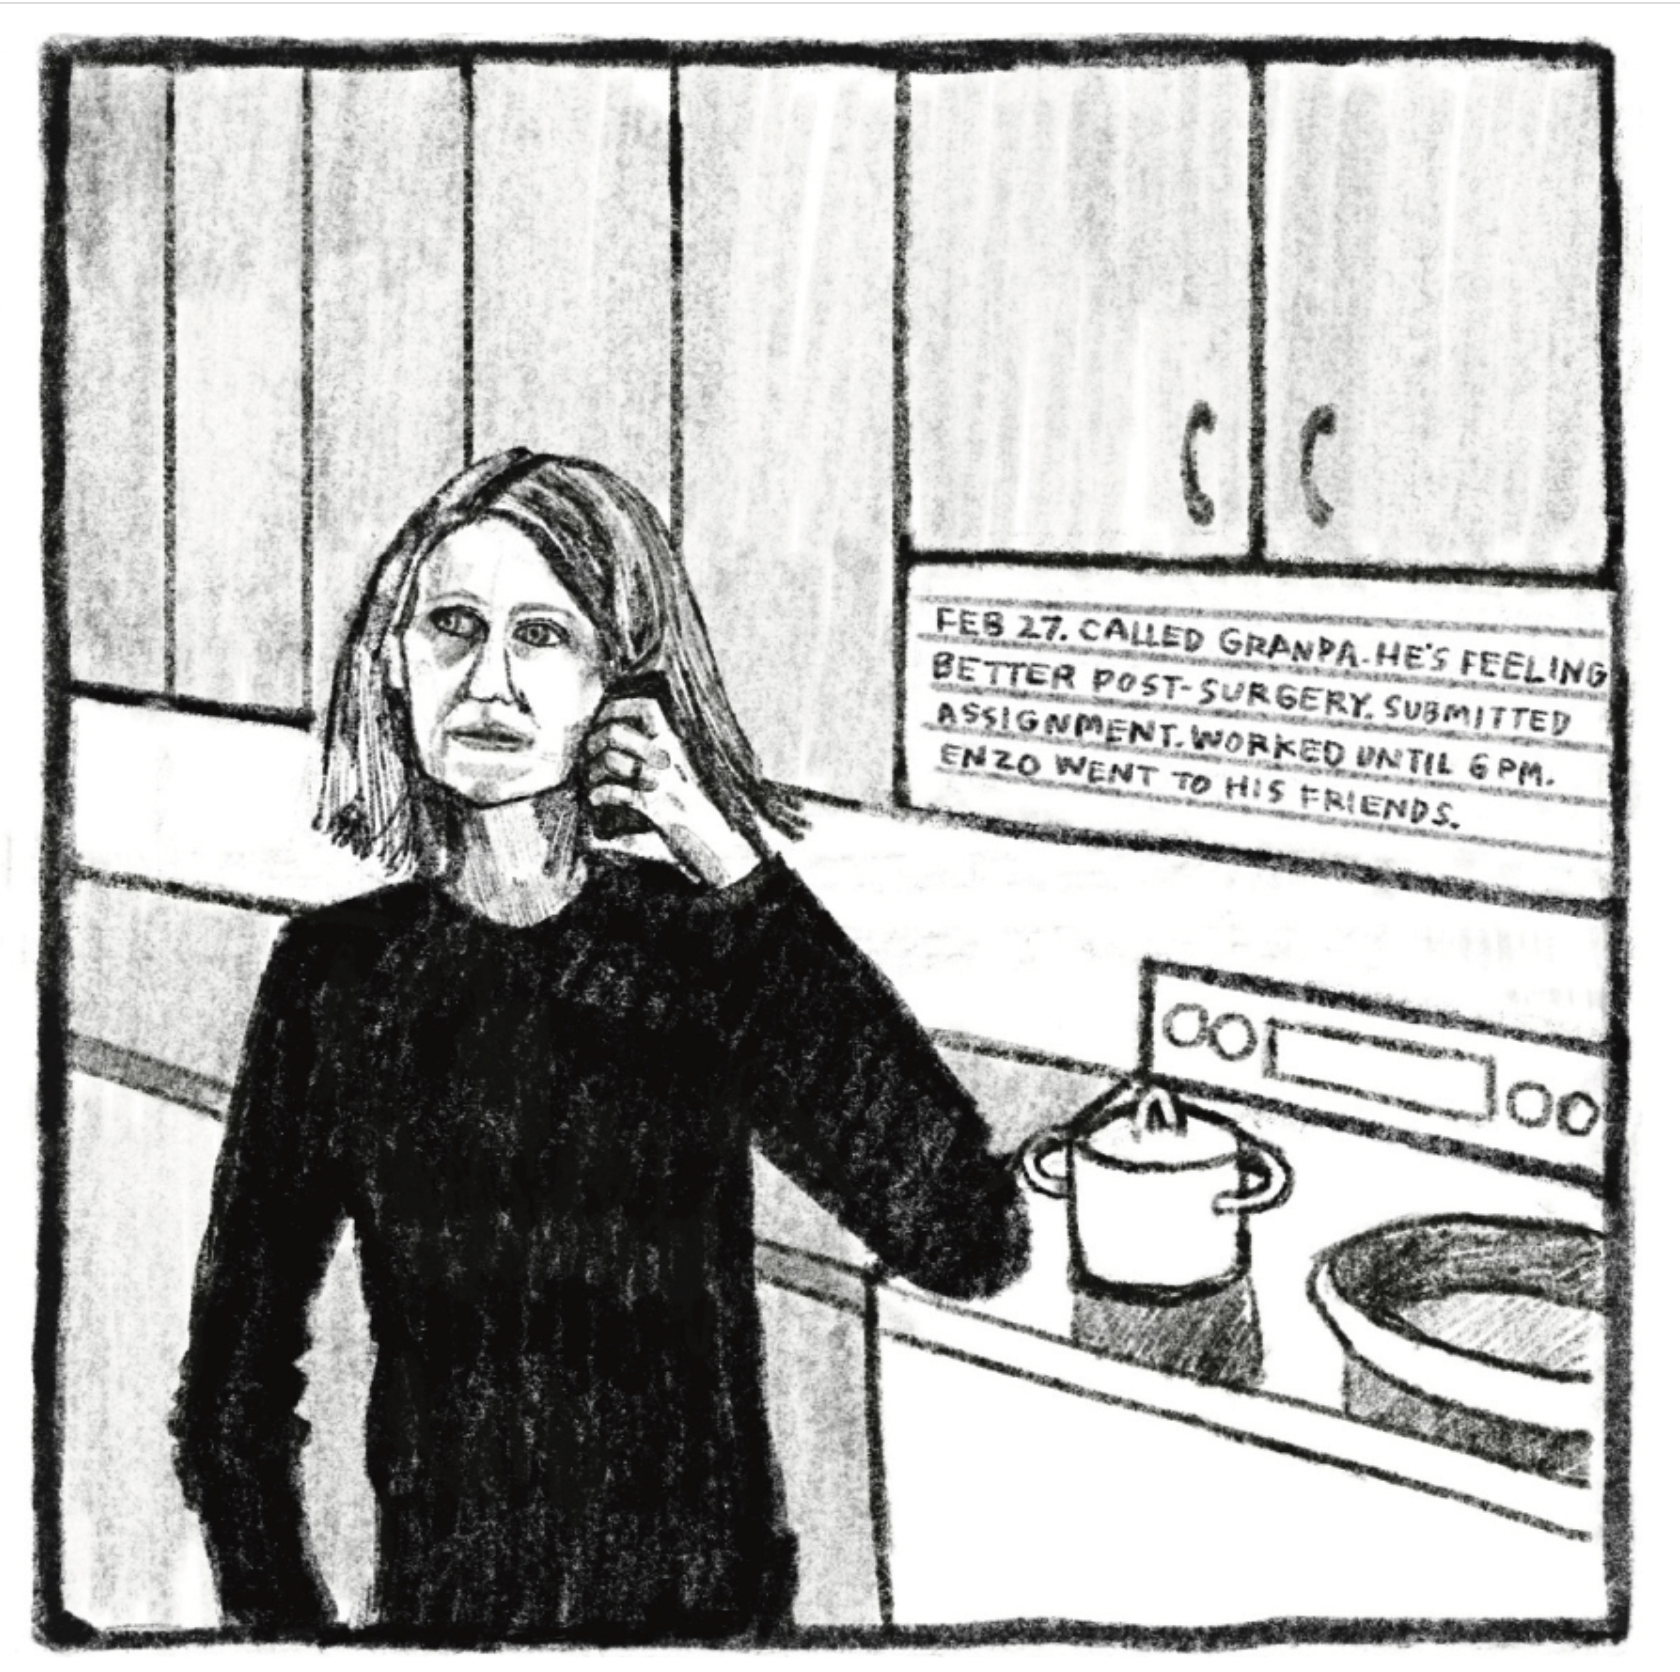 Hold Still Episode 10, Panel 4
Drawing of Kim on the phone in the kitchen.
Caption is written in a kitchen cabinet/stove overhead: "FEB 27. CALLED GRANDA. HE'S FEELING BETTER POST-SURGERY. SUBMITTED ASSIGNMENT. WORKED UNTIL 6 PM. ENZO WENT TO HIS FRIENDS."